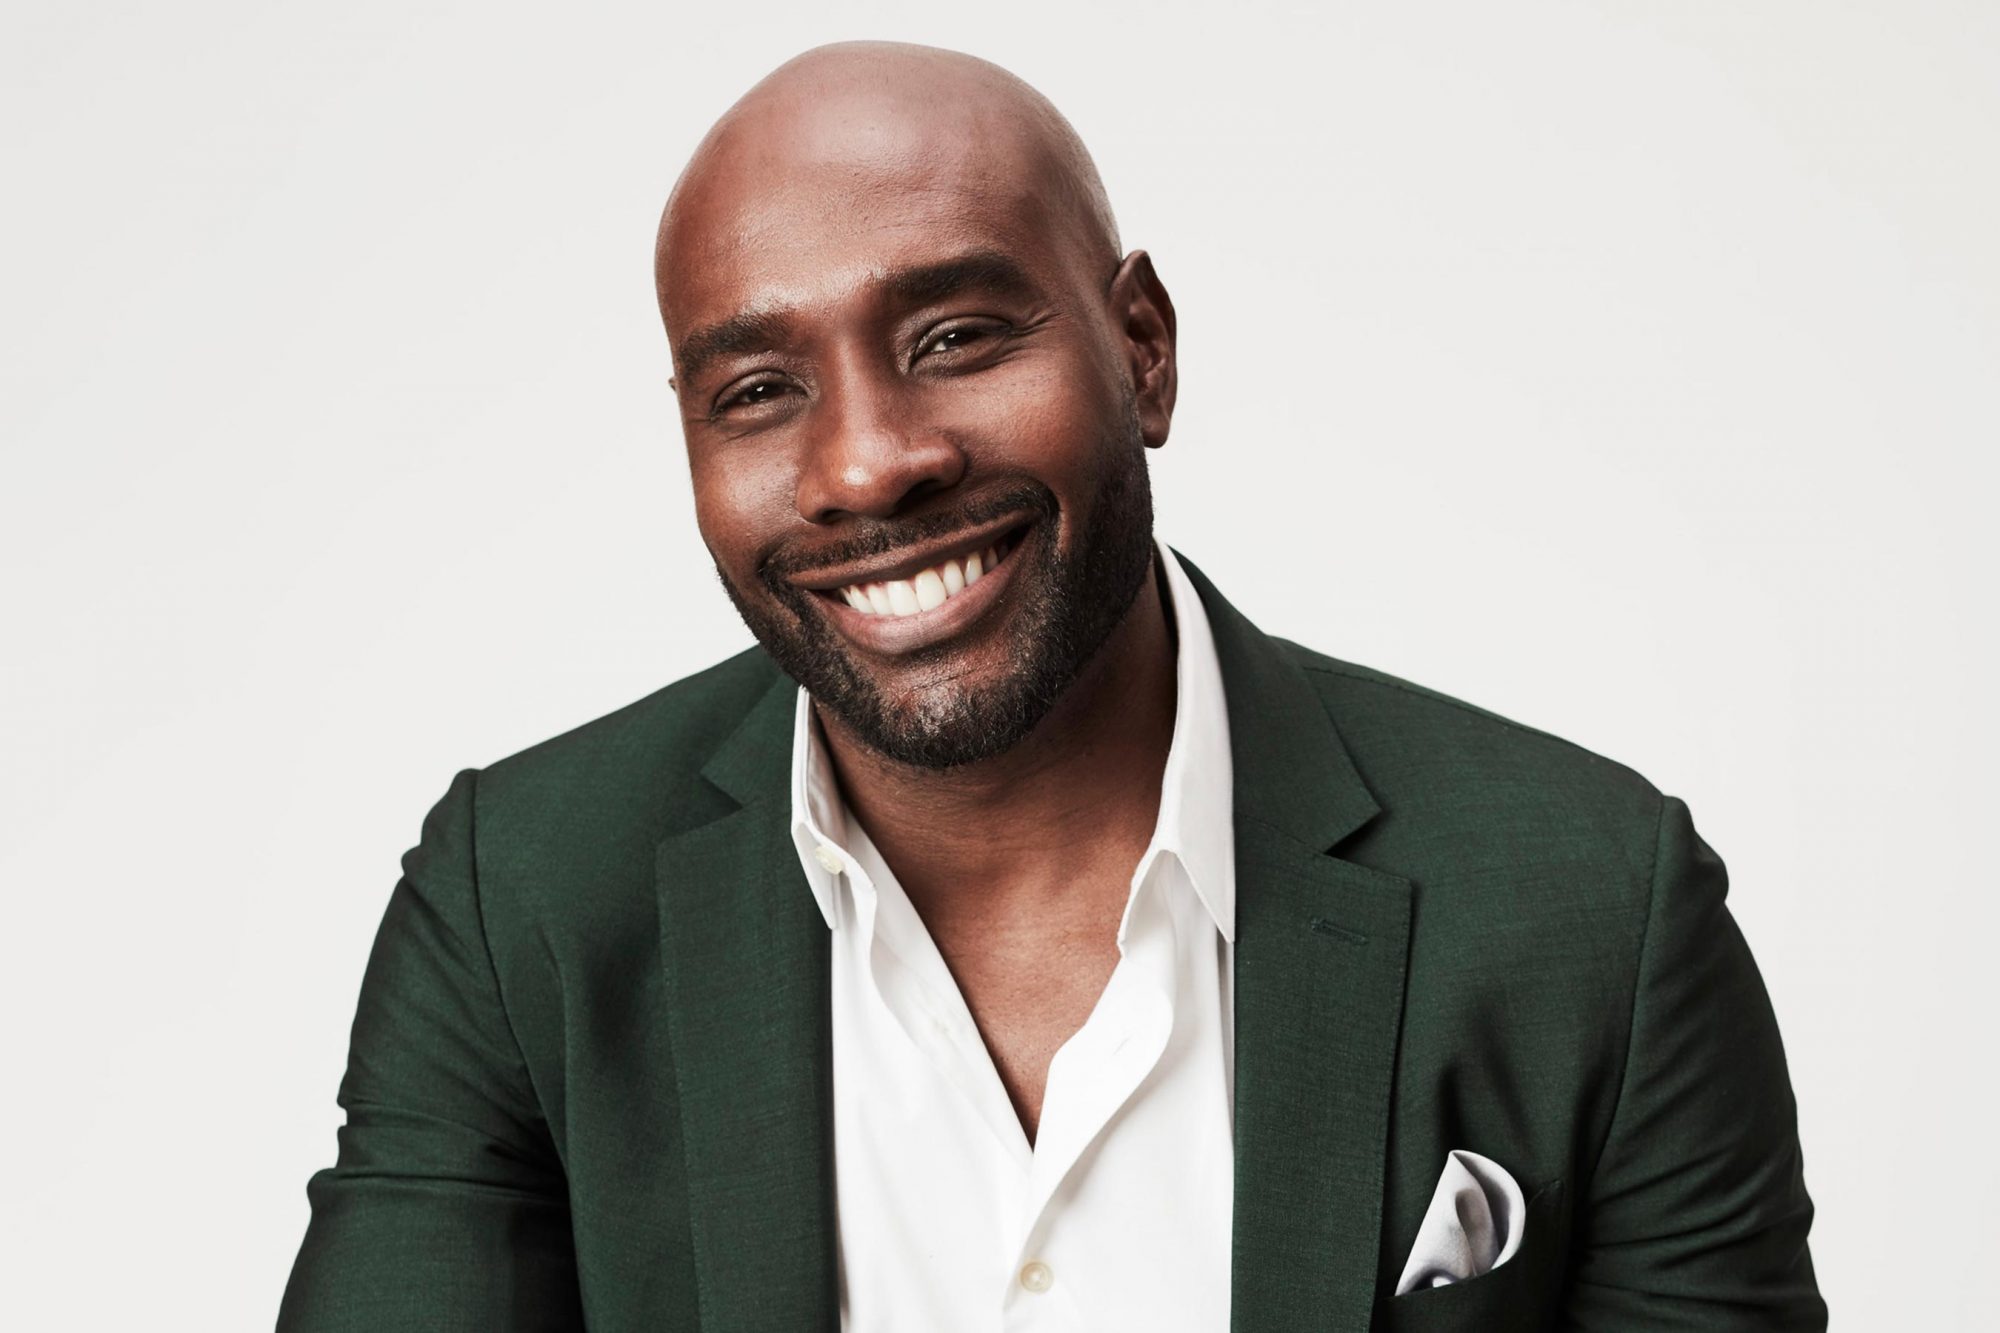 Morris Chestnut Adds His Swag To The "Our Kind of People" TV Seri...